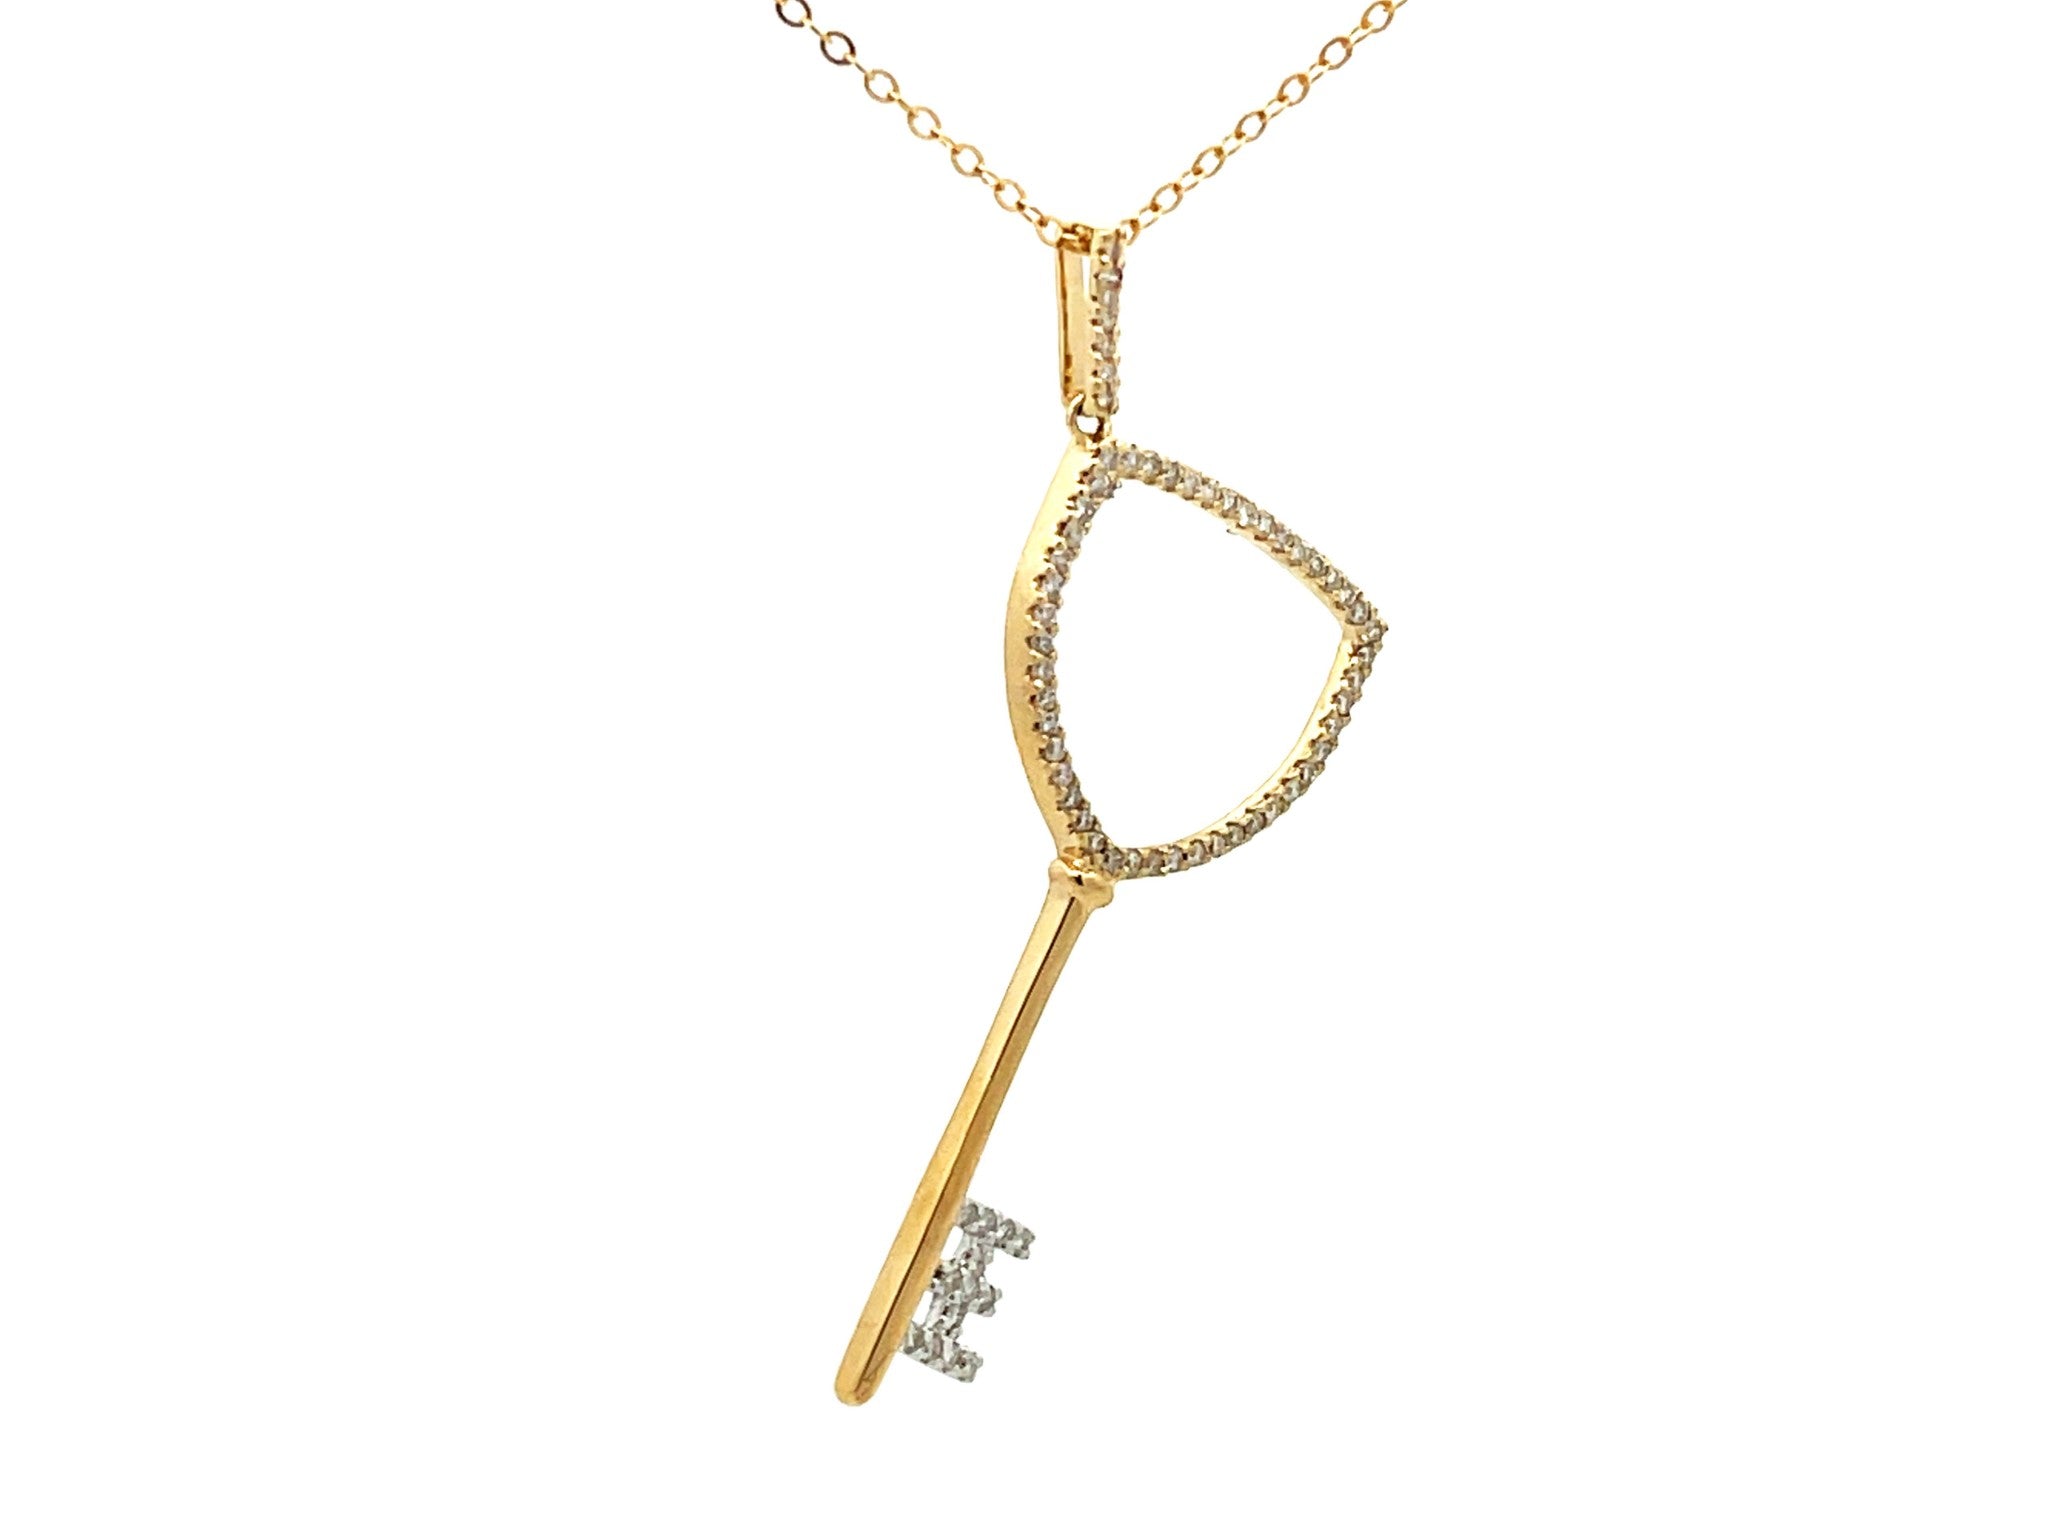 Diamond Key Necklace in 14k Yellow Gold